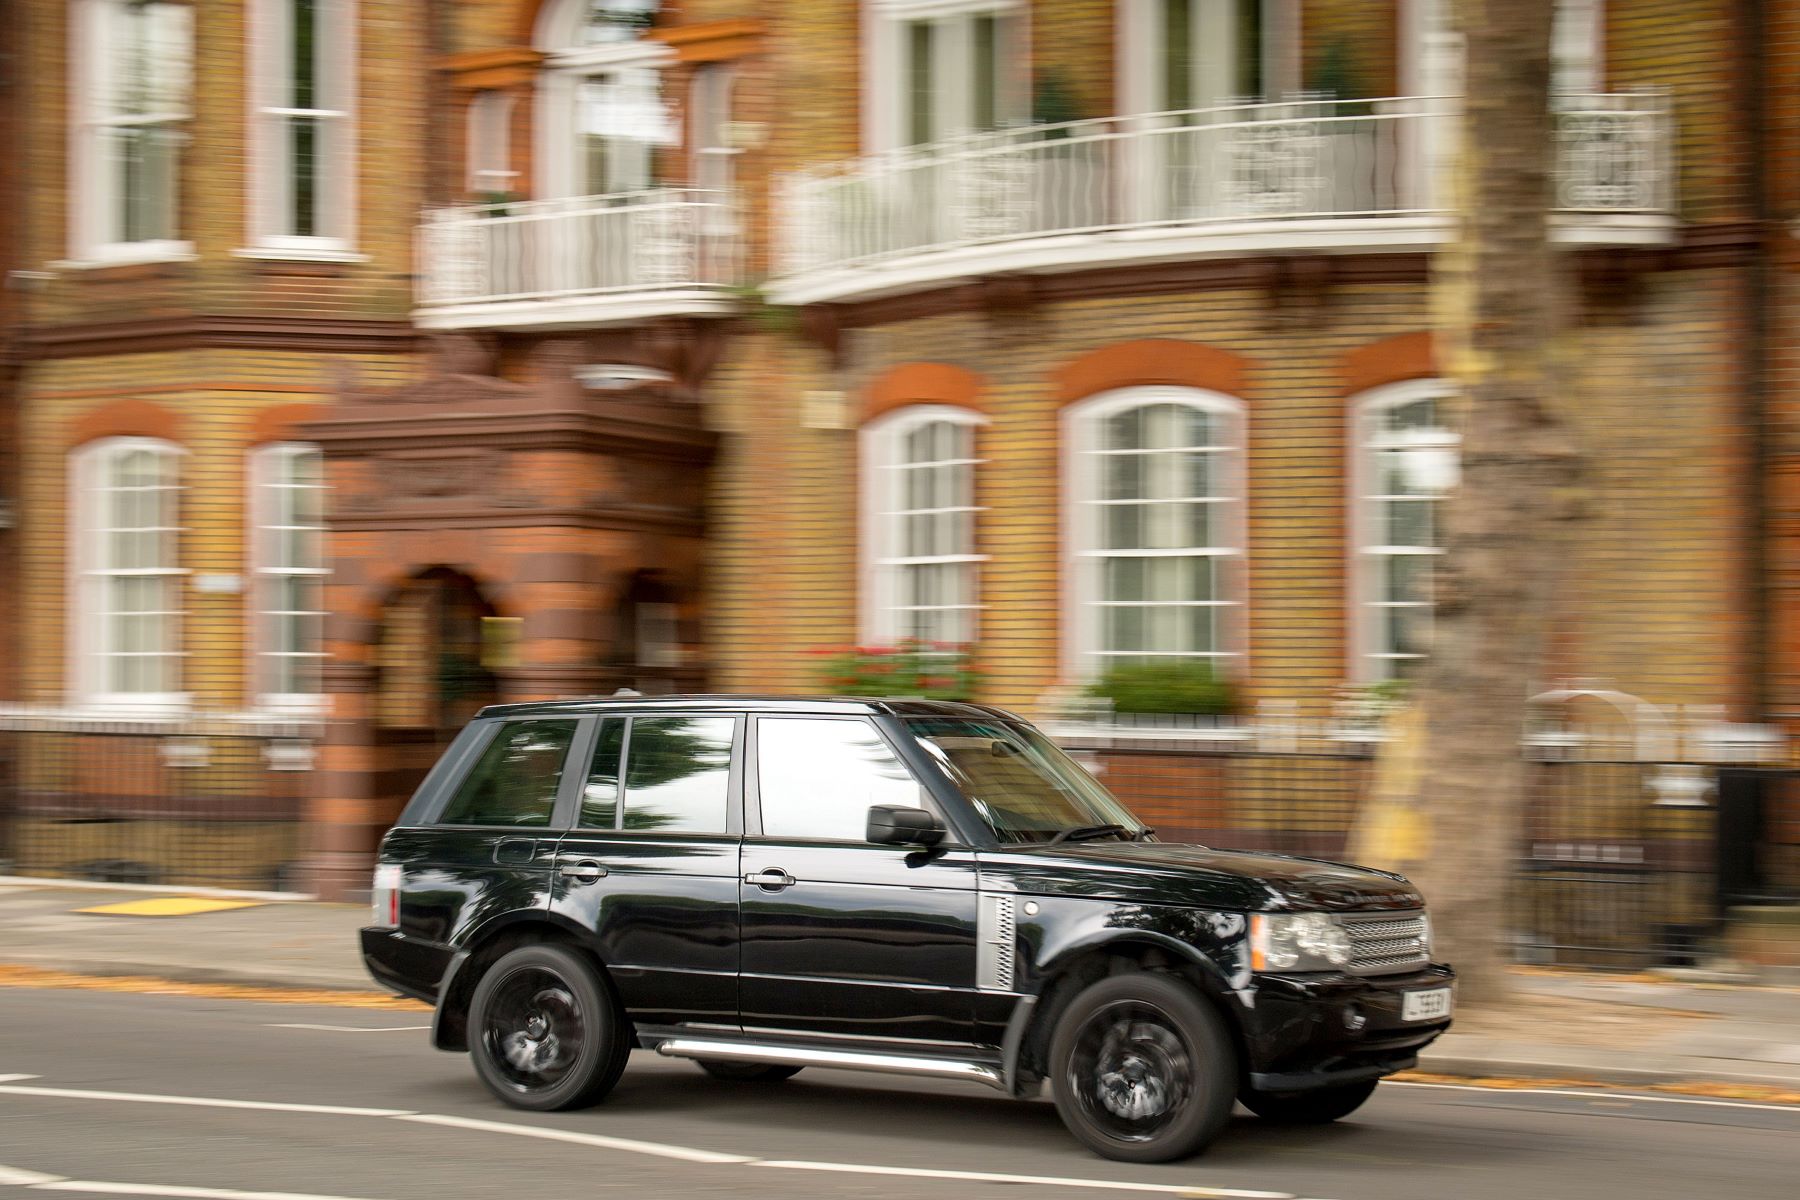 An old and used Land Rover Range Rover model driving in Chelsea of West London